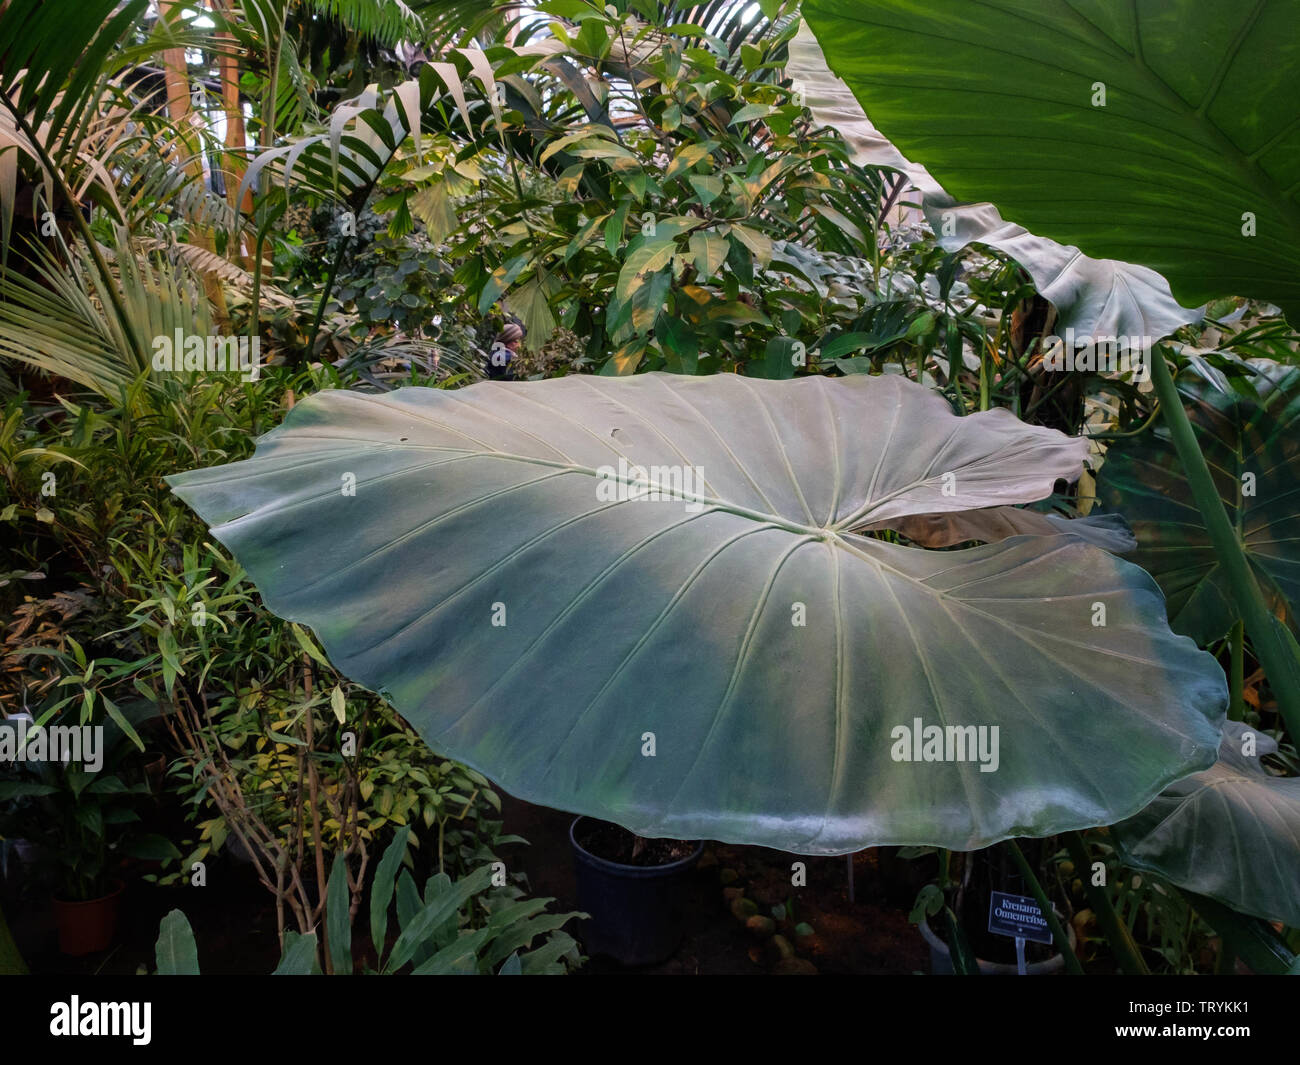 Tropical rain forest plant with big umbrella shaped leaves in the greenhouse. Stock Photo